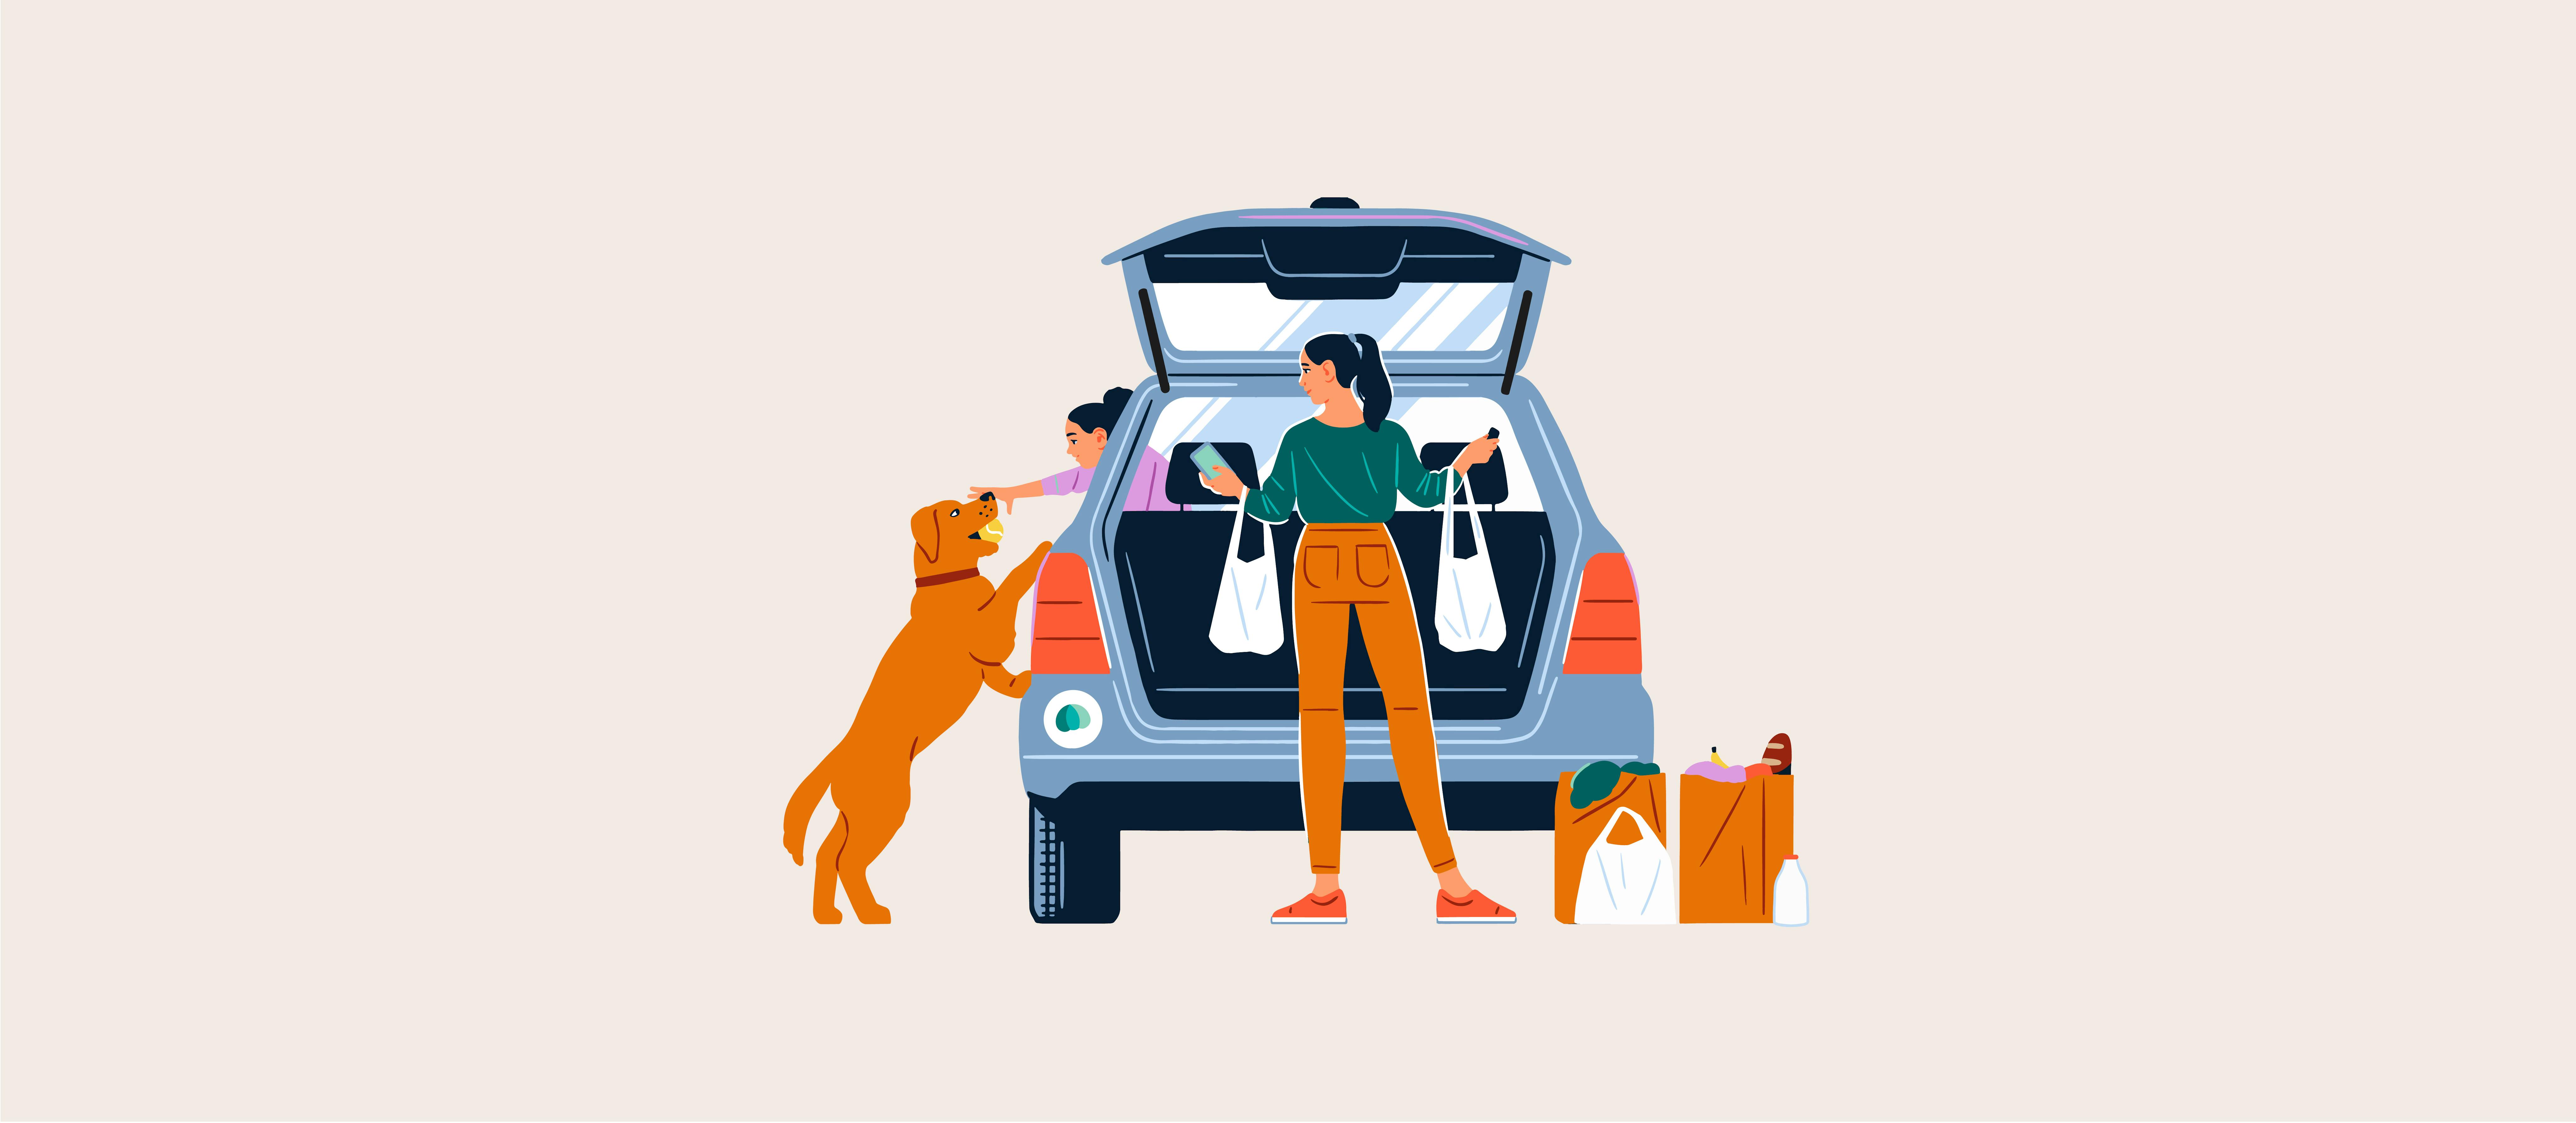 Illustration of woman unloading groceries from a car with a young girl and dog nearby. 